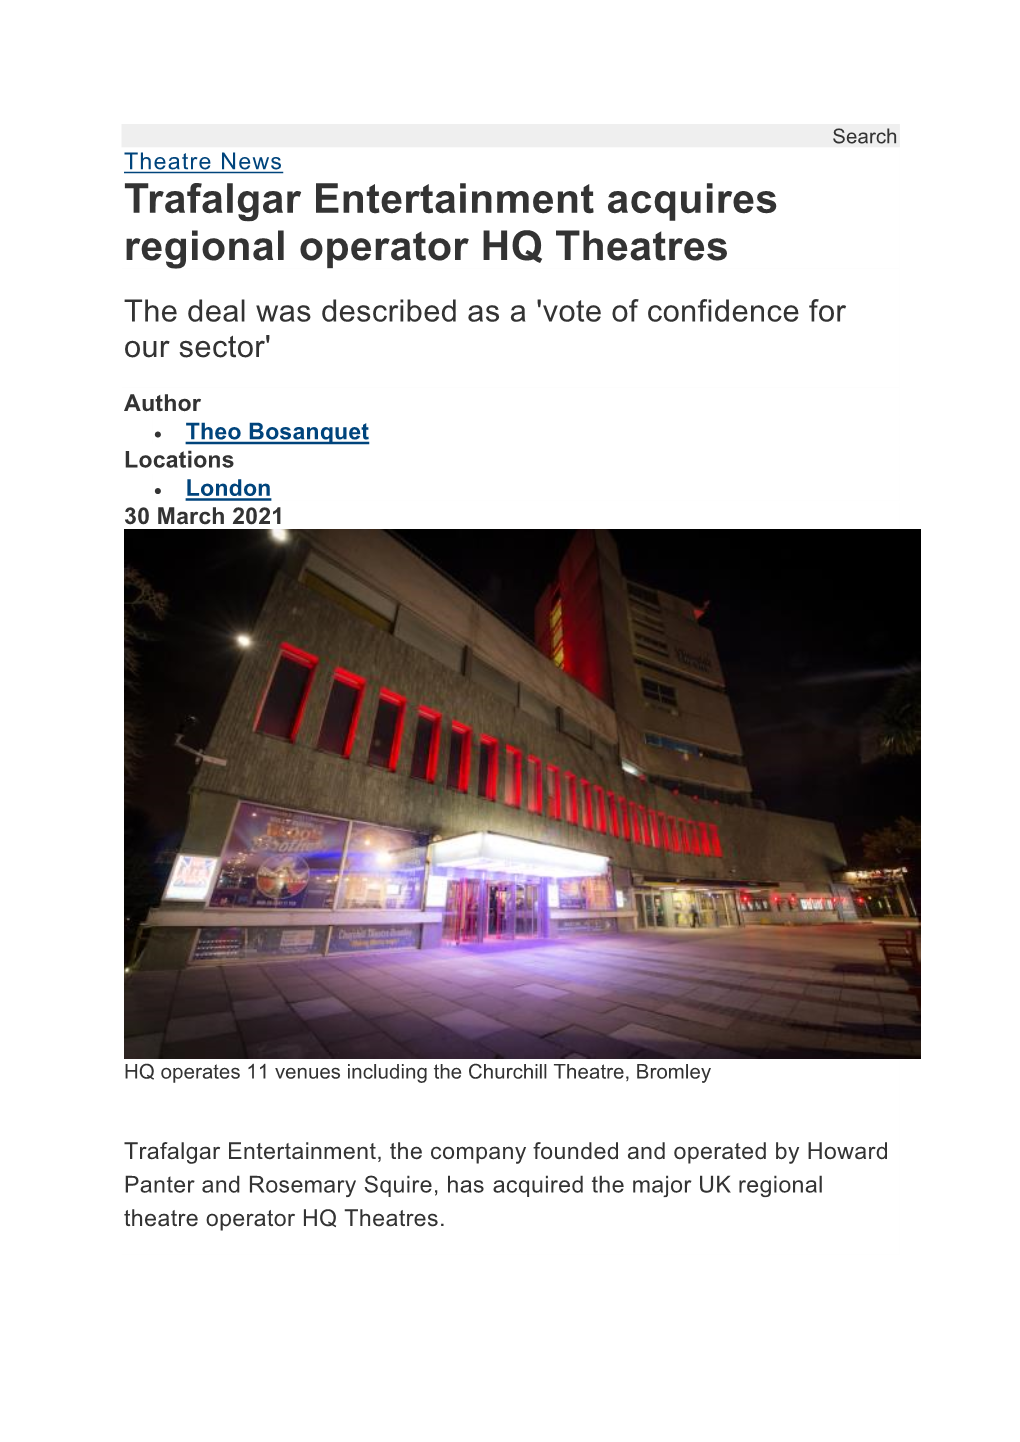 Trafalgar Entertainment Acquires Regional Operator HQ Theatres the Deal Was Described As a 'Vote of Confidence for Our Sector'